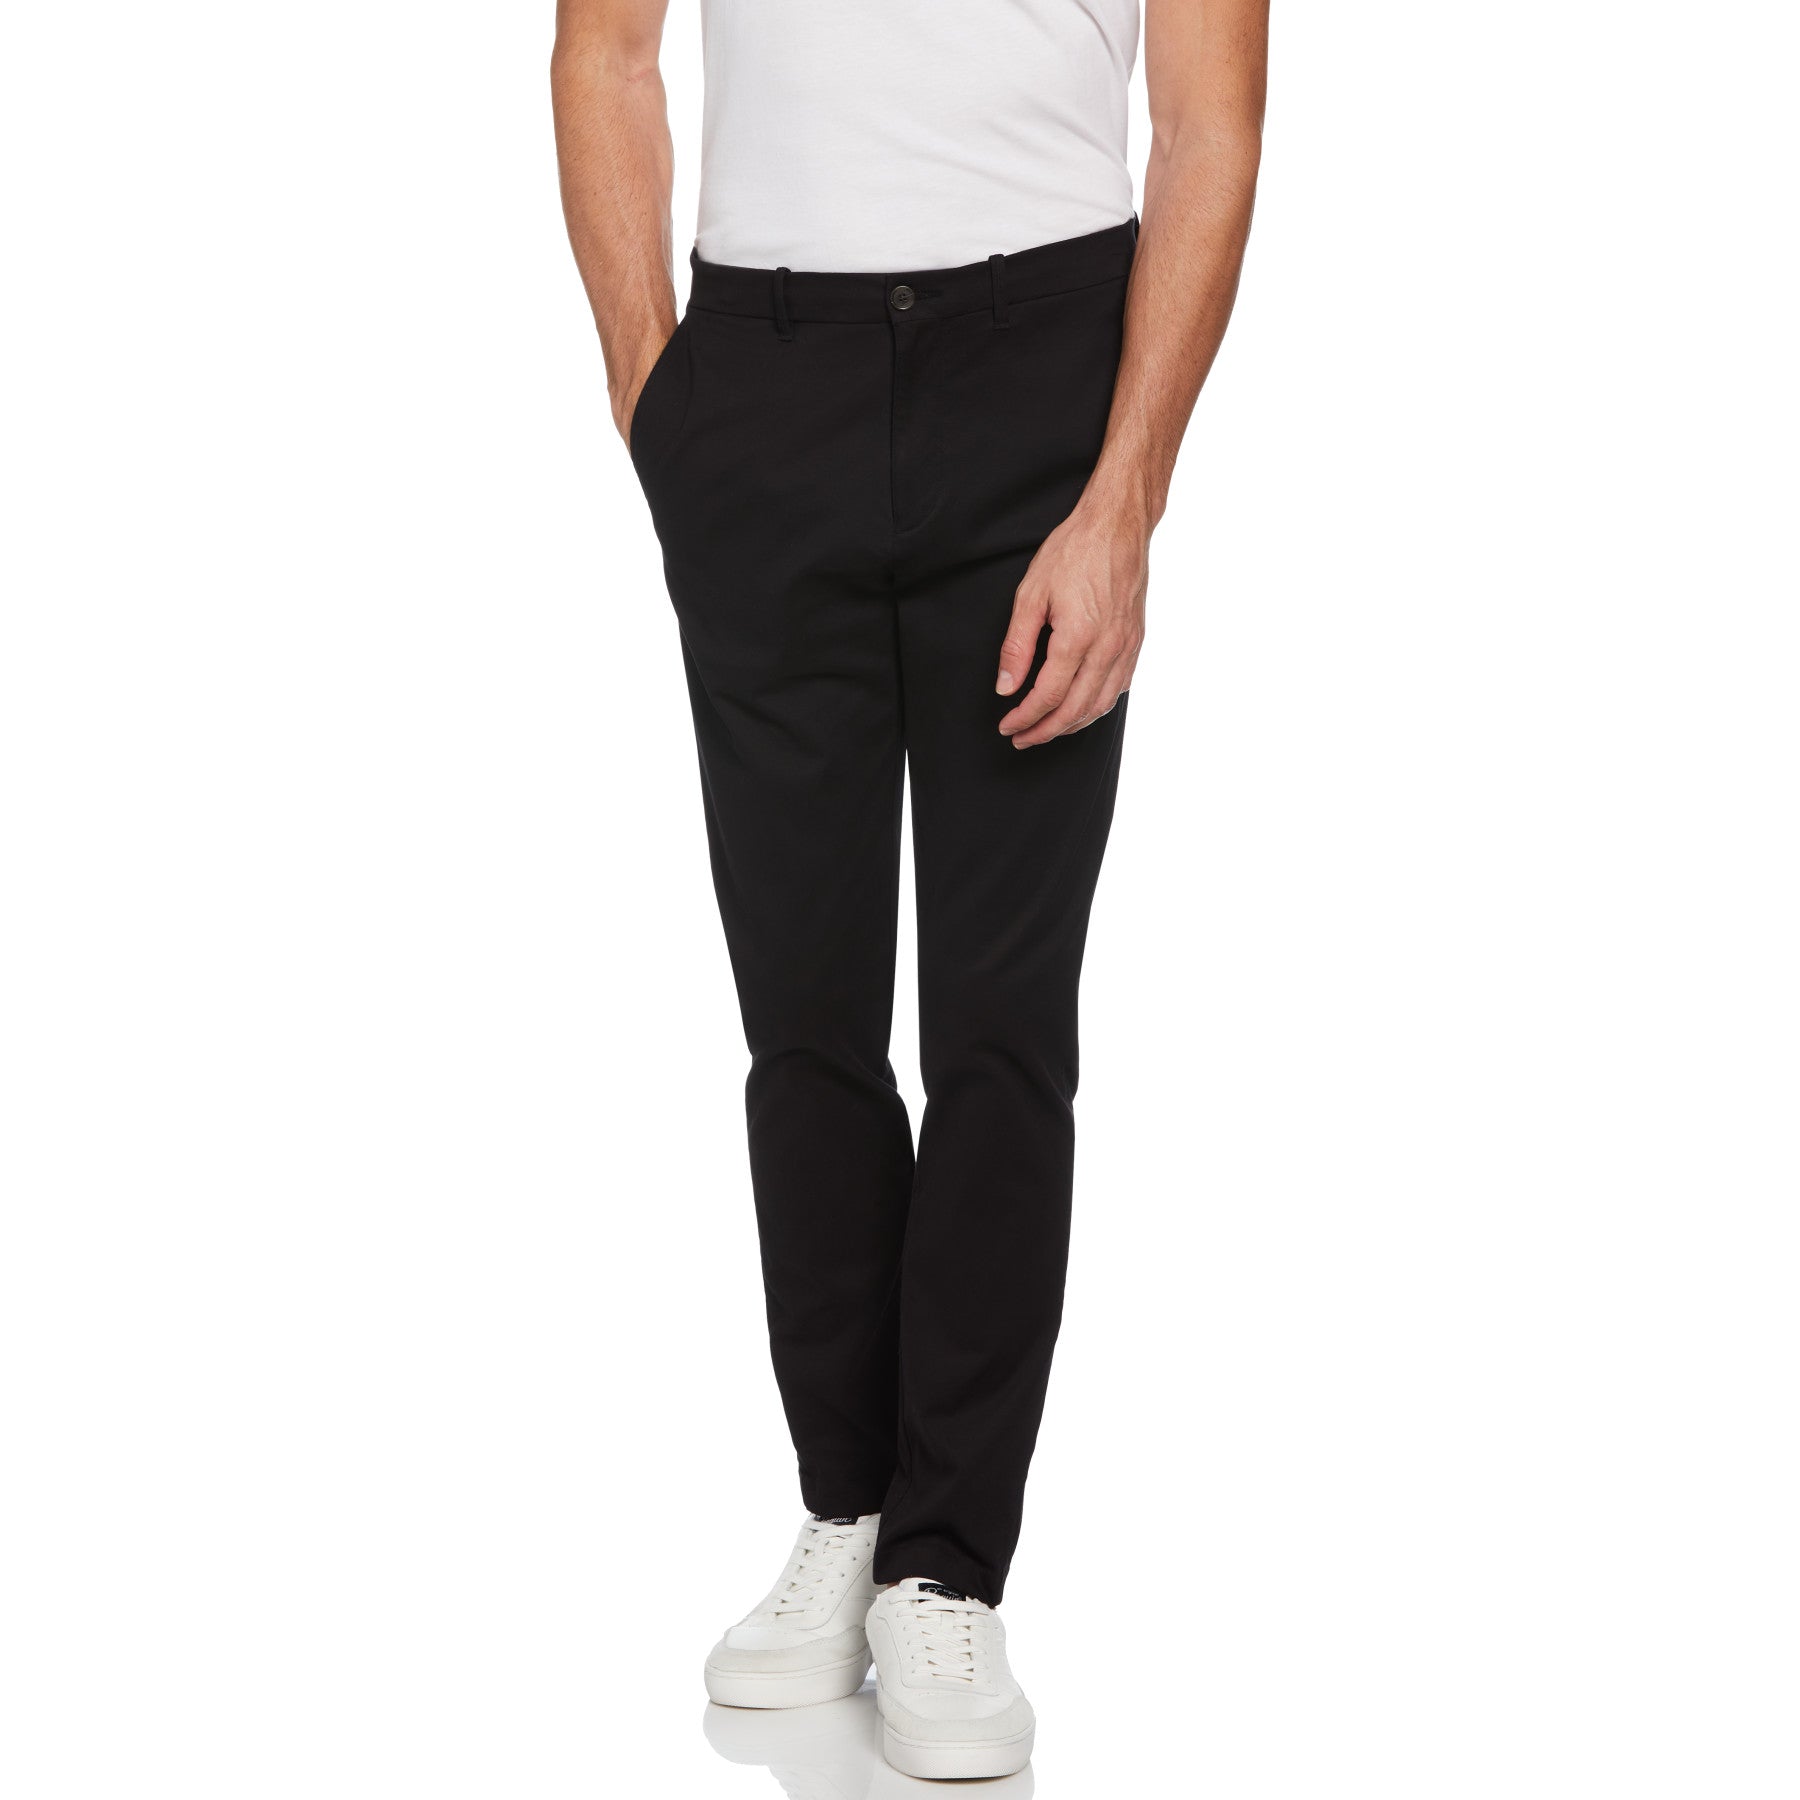 View Bedford Cord Slim Fit Chino Trousers In True Black information